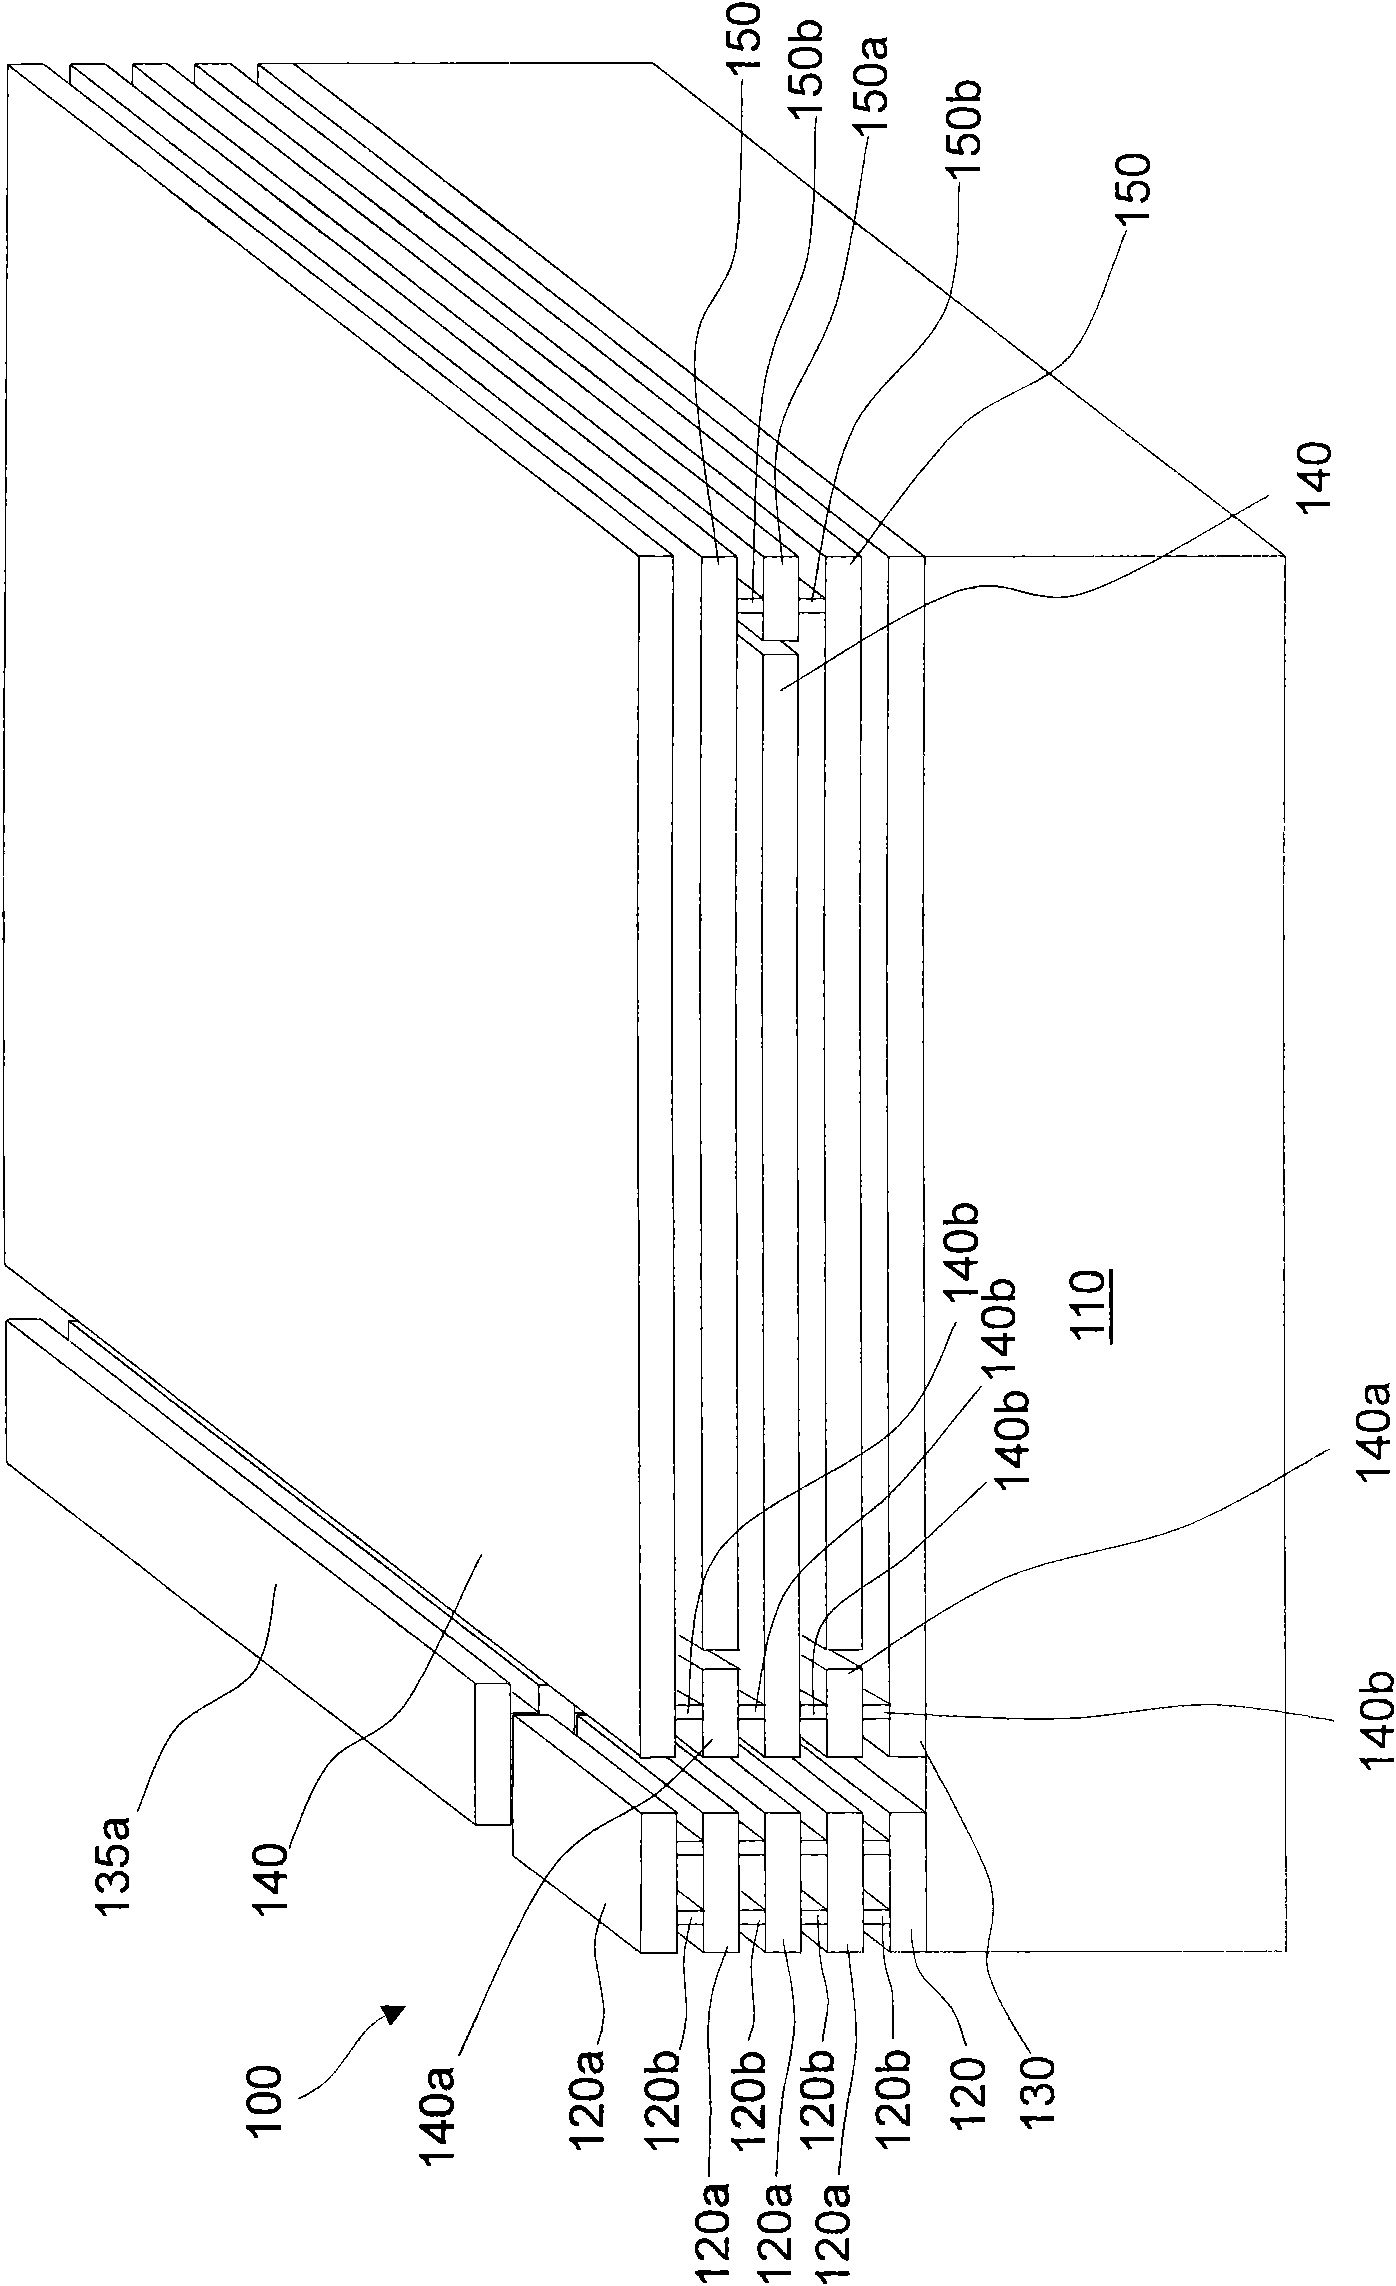 Metal-oxide semiconductor field effect transistor integrated with capacitor